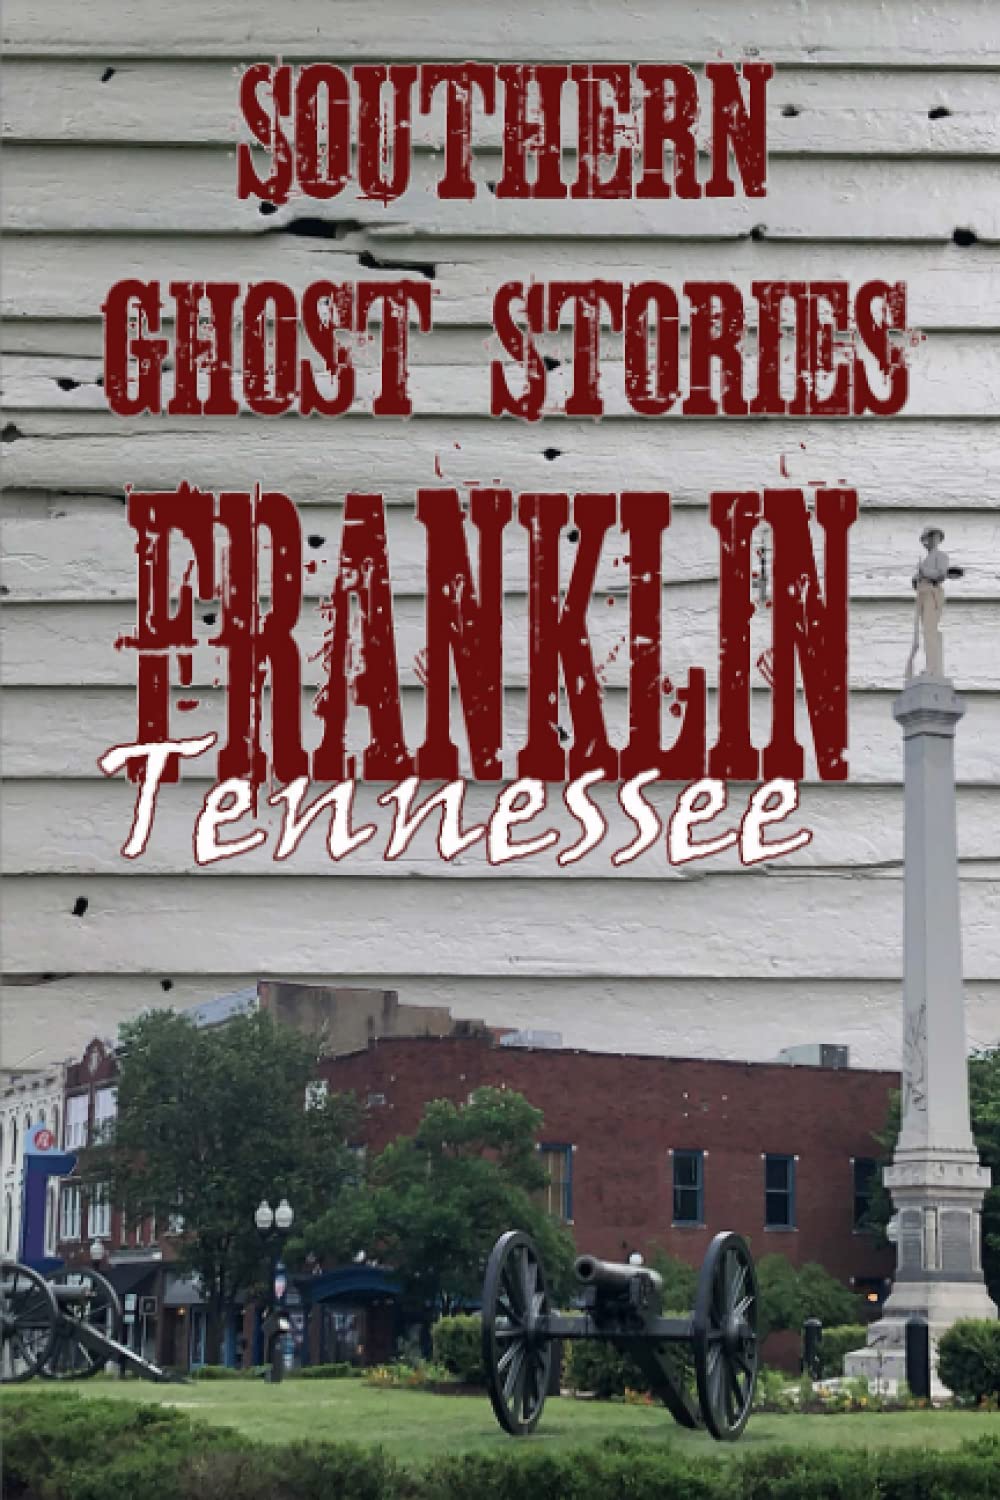 Southern Ghost Stories: Franklin, Tennessee